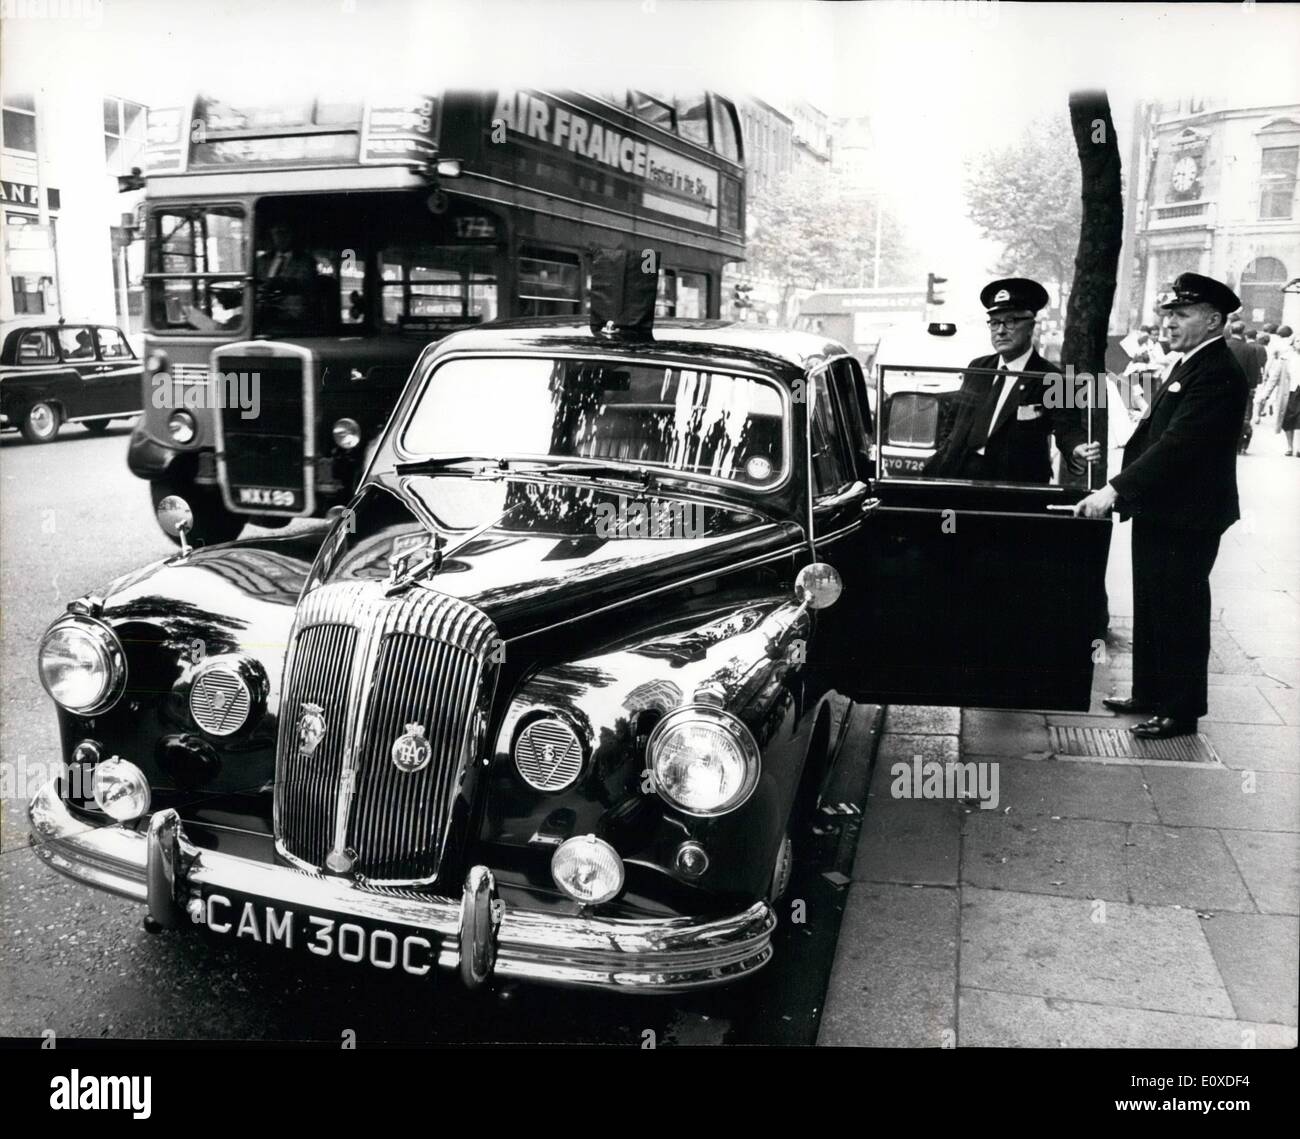 Jun. 06, 1966 - The Mayor as Bus Inspector When the last of the non stop convoy of morning rush hour buses has been inspected, a gleaming Daimler pulls up. Peaked cap is raised to peaked cap as the chauffeur greets his passenger. His Worship the Mayor of Camden, otherwise London Transport inspector of buses, Councillor Mike Patric O'Connor. The scene is Kingsway, London, Counsillor O'Connor has just clocked off after the morning shift. His mayoral limousine whisks him to his home for a quick brush up before the day of civic duties begins Stock Photo